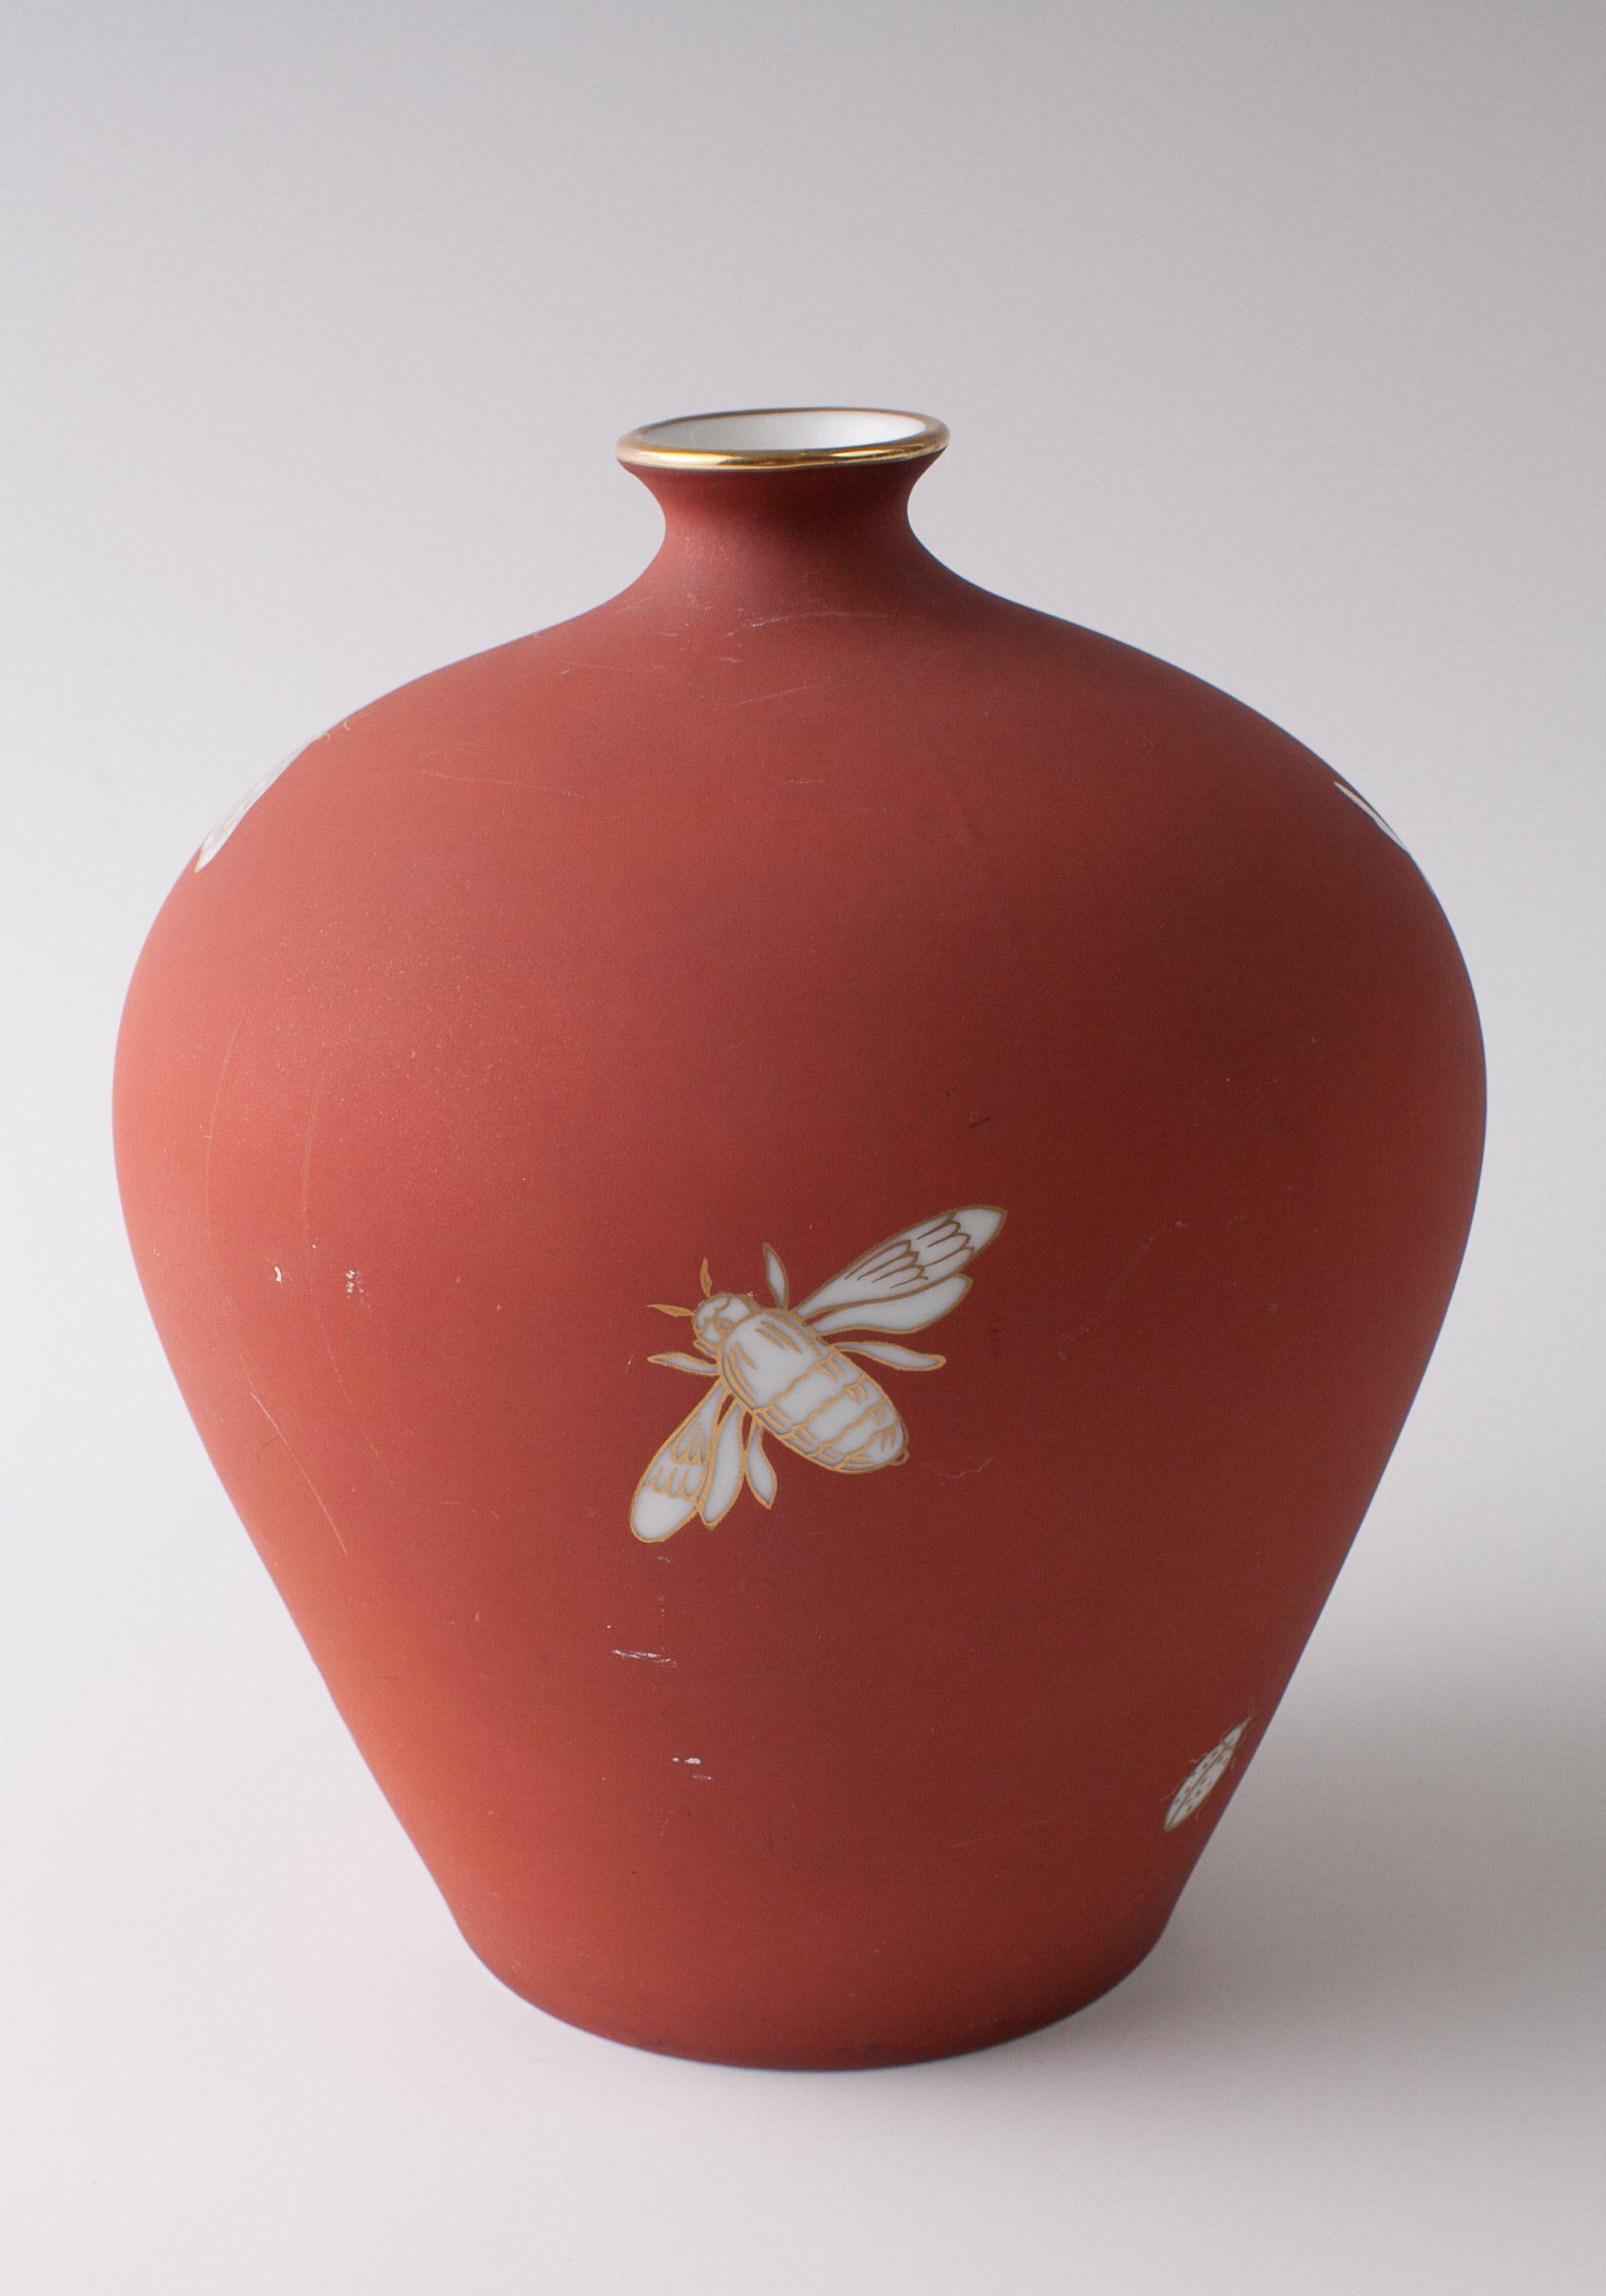 Exceptional and early 1920s-1930s Richard Ginori Vase Designed by Giovanni Garibold. This beautiful example is constructed of a glazed porcelain with smooth rust backround and features an insects theme each of which are hand-painted and outlined in